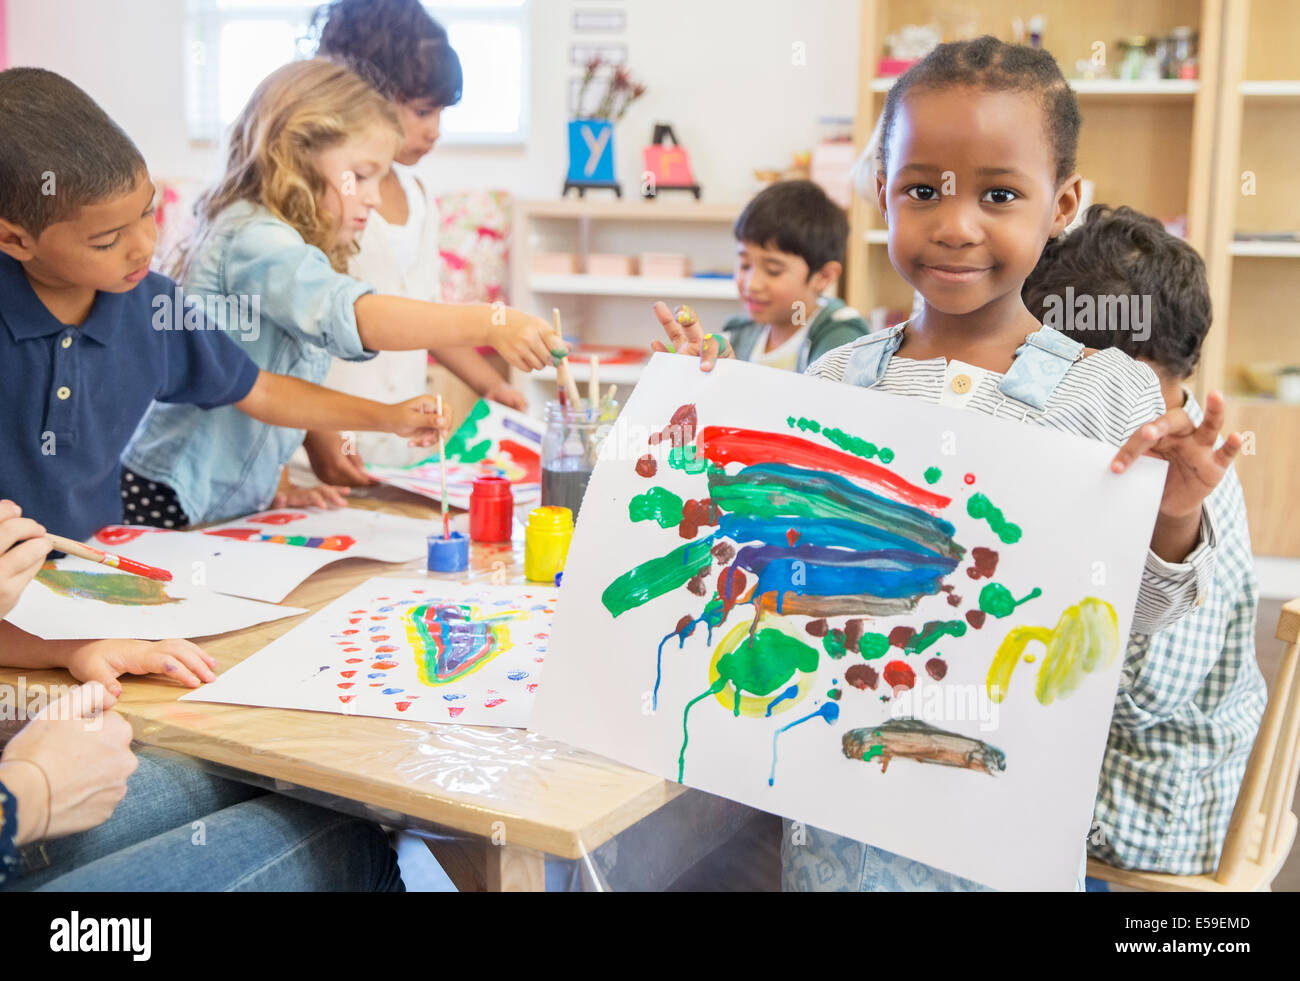 Student showing off finger painting in classroom Stock Photo